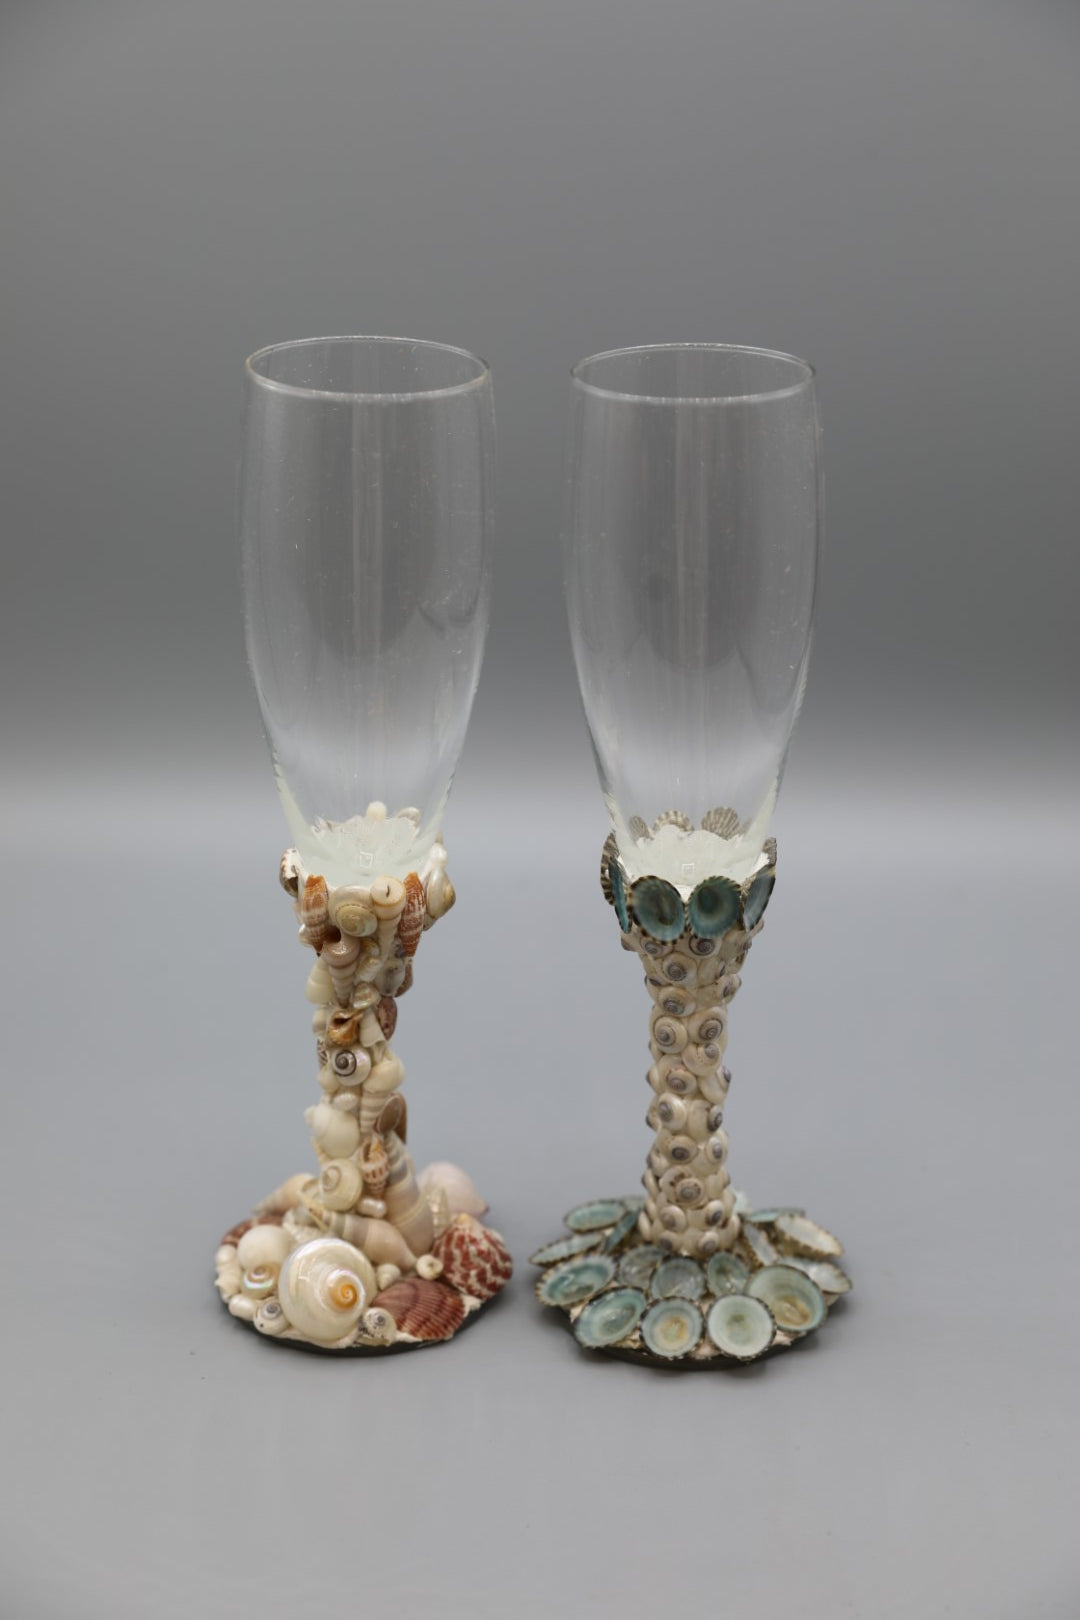 Shell Champagne Flute